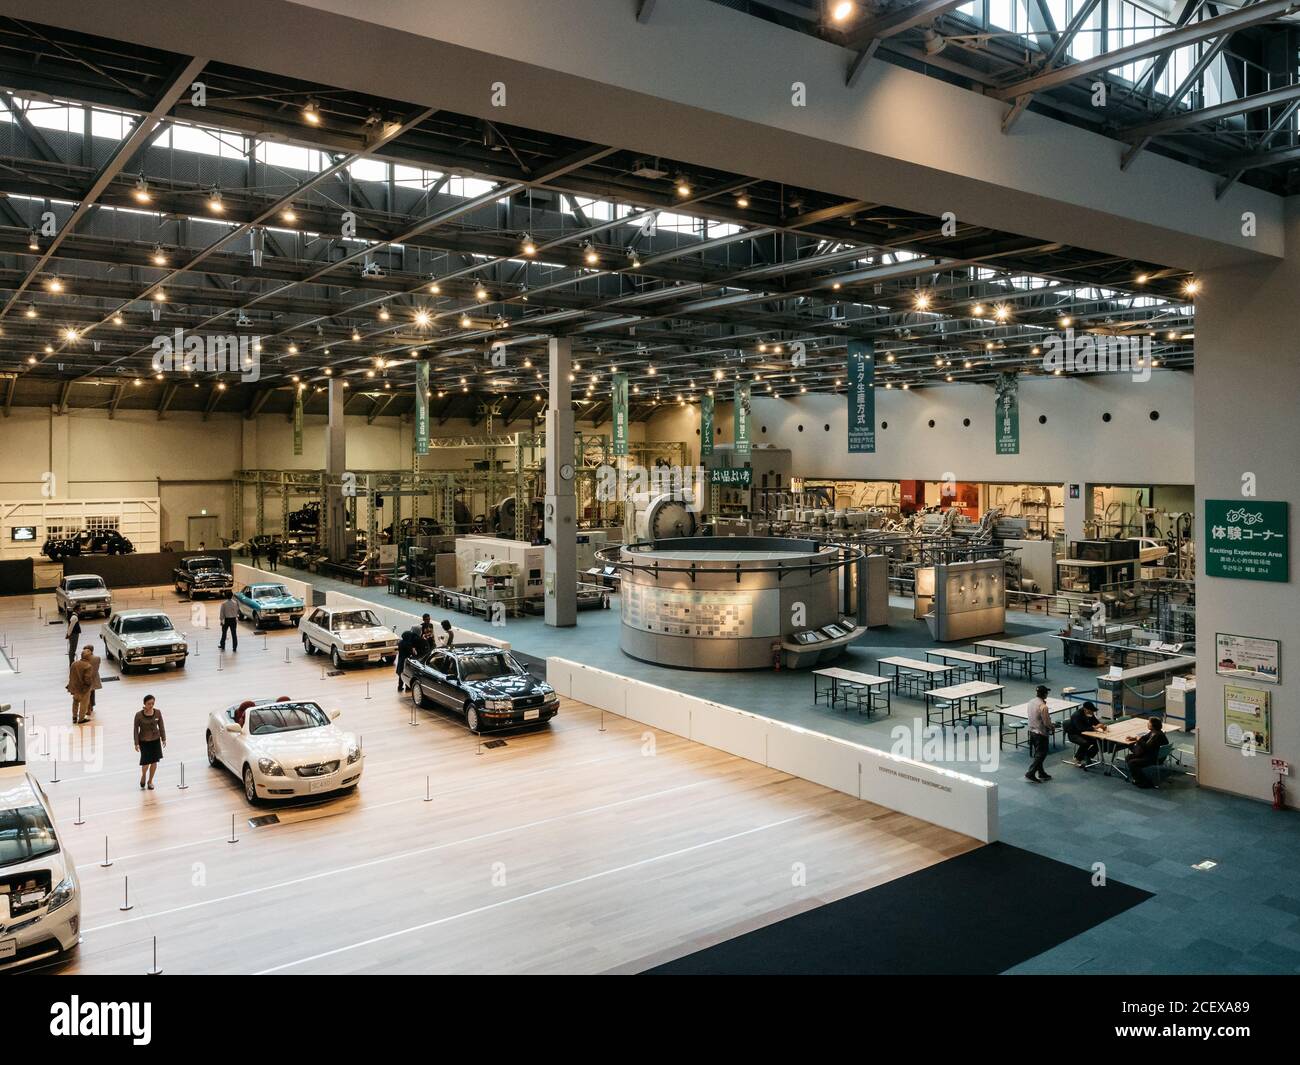 Nagoya, Aichi, Japan - Automobile Pavilion in Toyota Commemorative Museum of Industry and Technology. Motor vehicles presented in a hall. Stock Photo